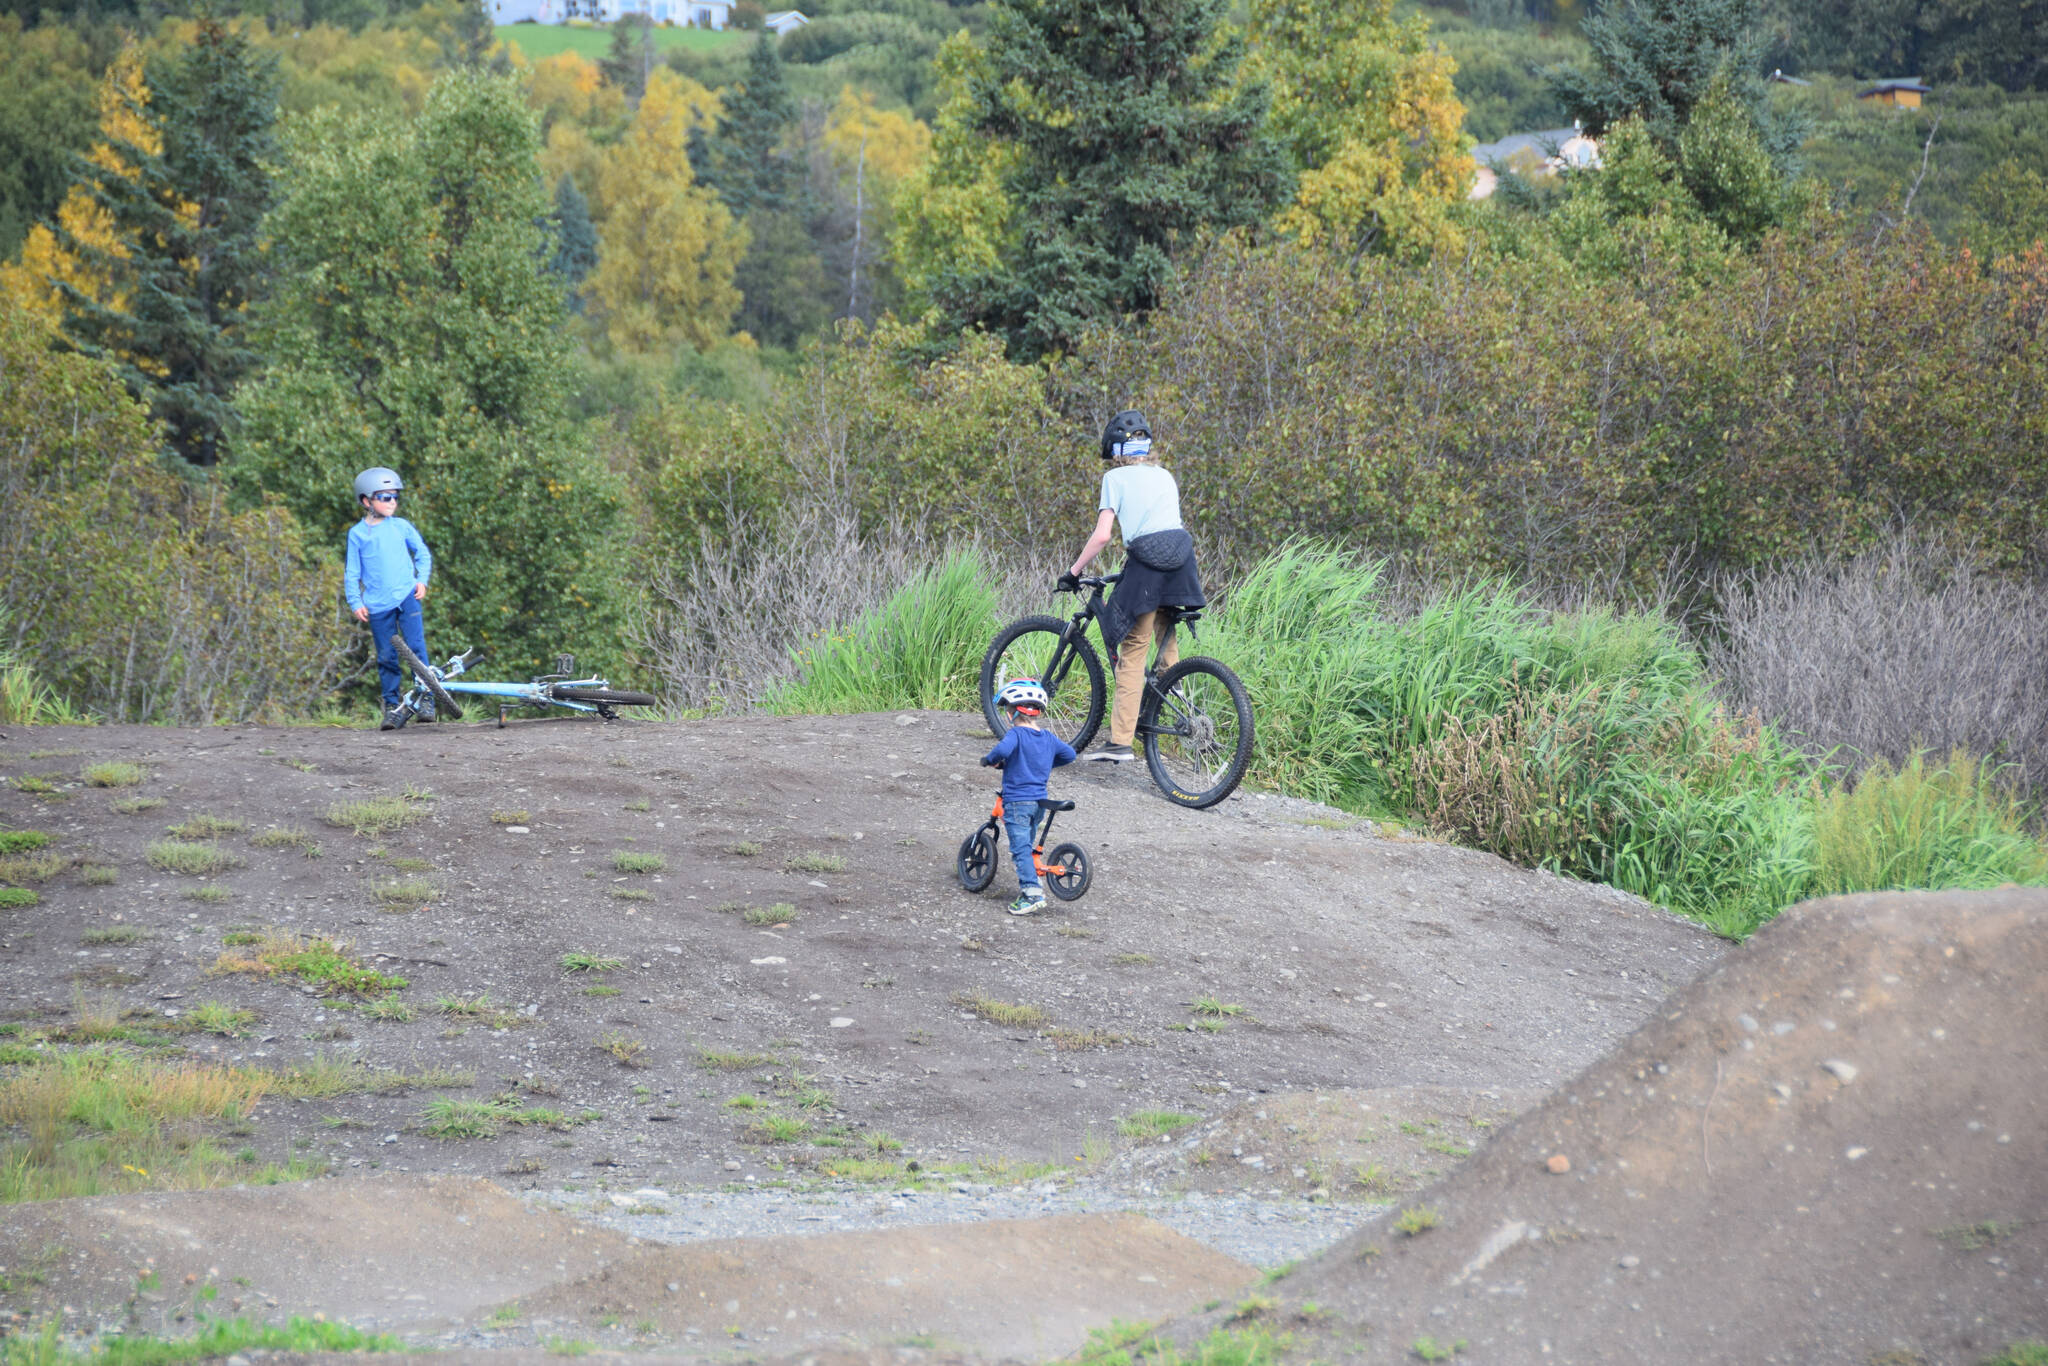 Kids play in the dirt bike area at the Kachemak City Park Grand Opening on Saturday, Sept. 17, 2022. (Photo by Charlie Menke / Homer News)